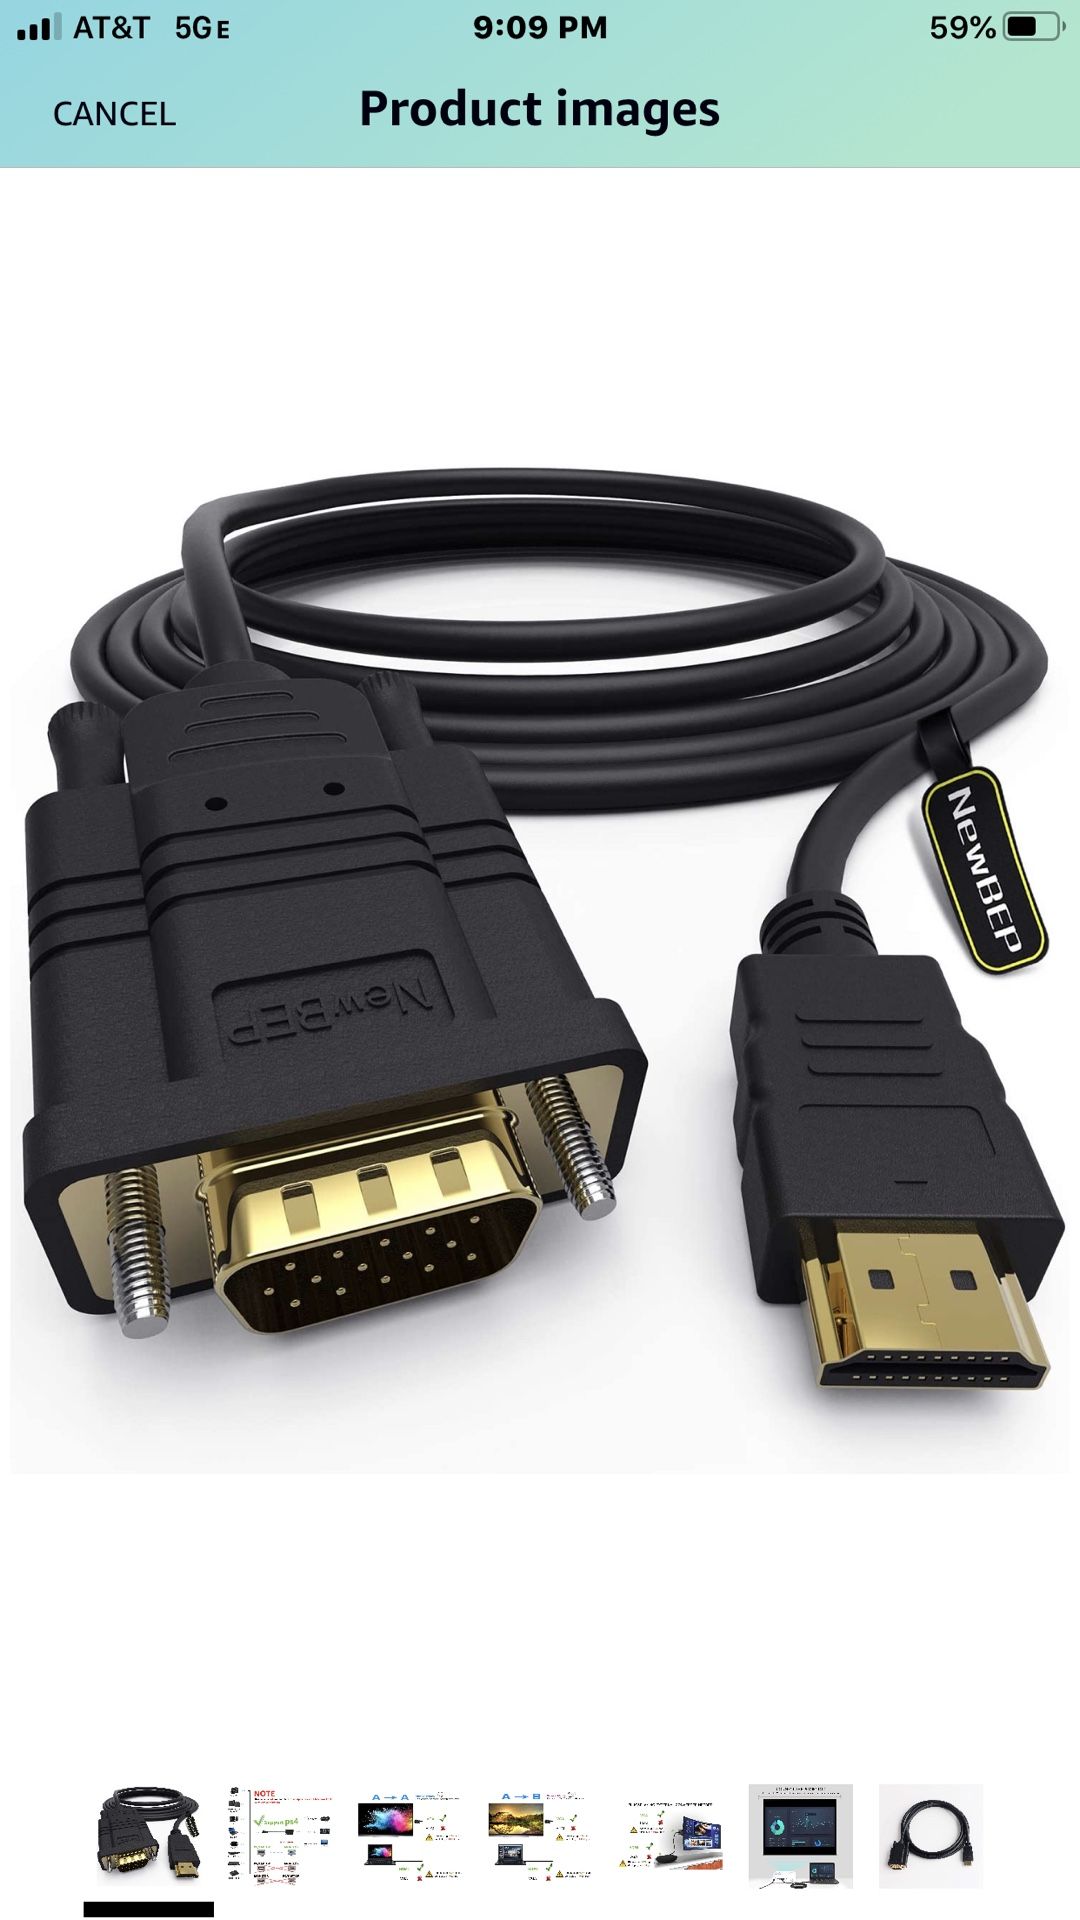 HDMI to VGA Adapter Cable, NewBEP 6ft/1.8m Gold-Plated 1080P HDMI Male to VGA Male Active Video Converter Cord Support Notebook PC DVD Player Laptop